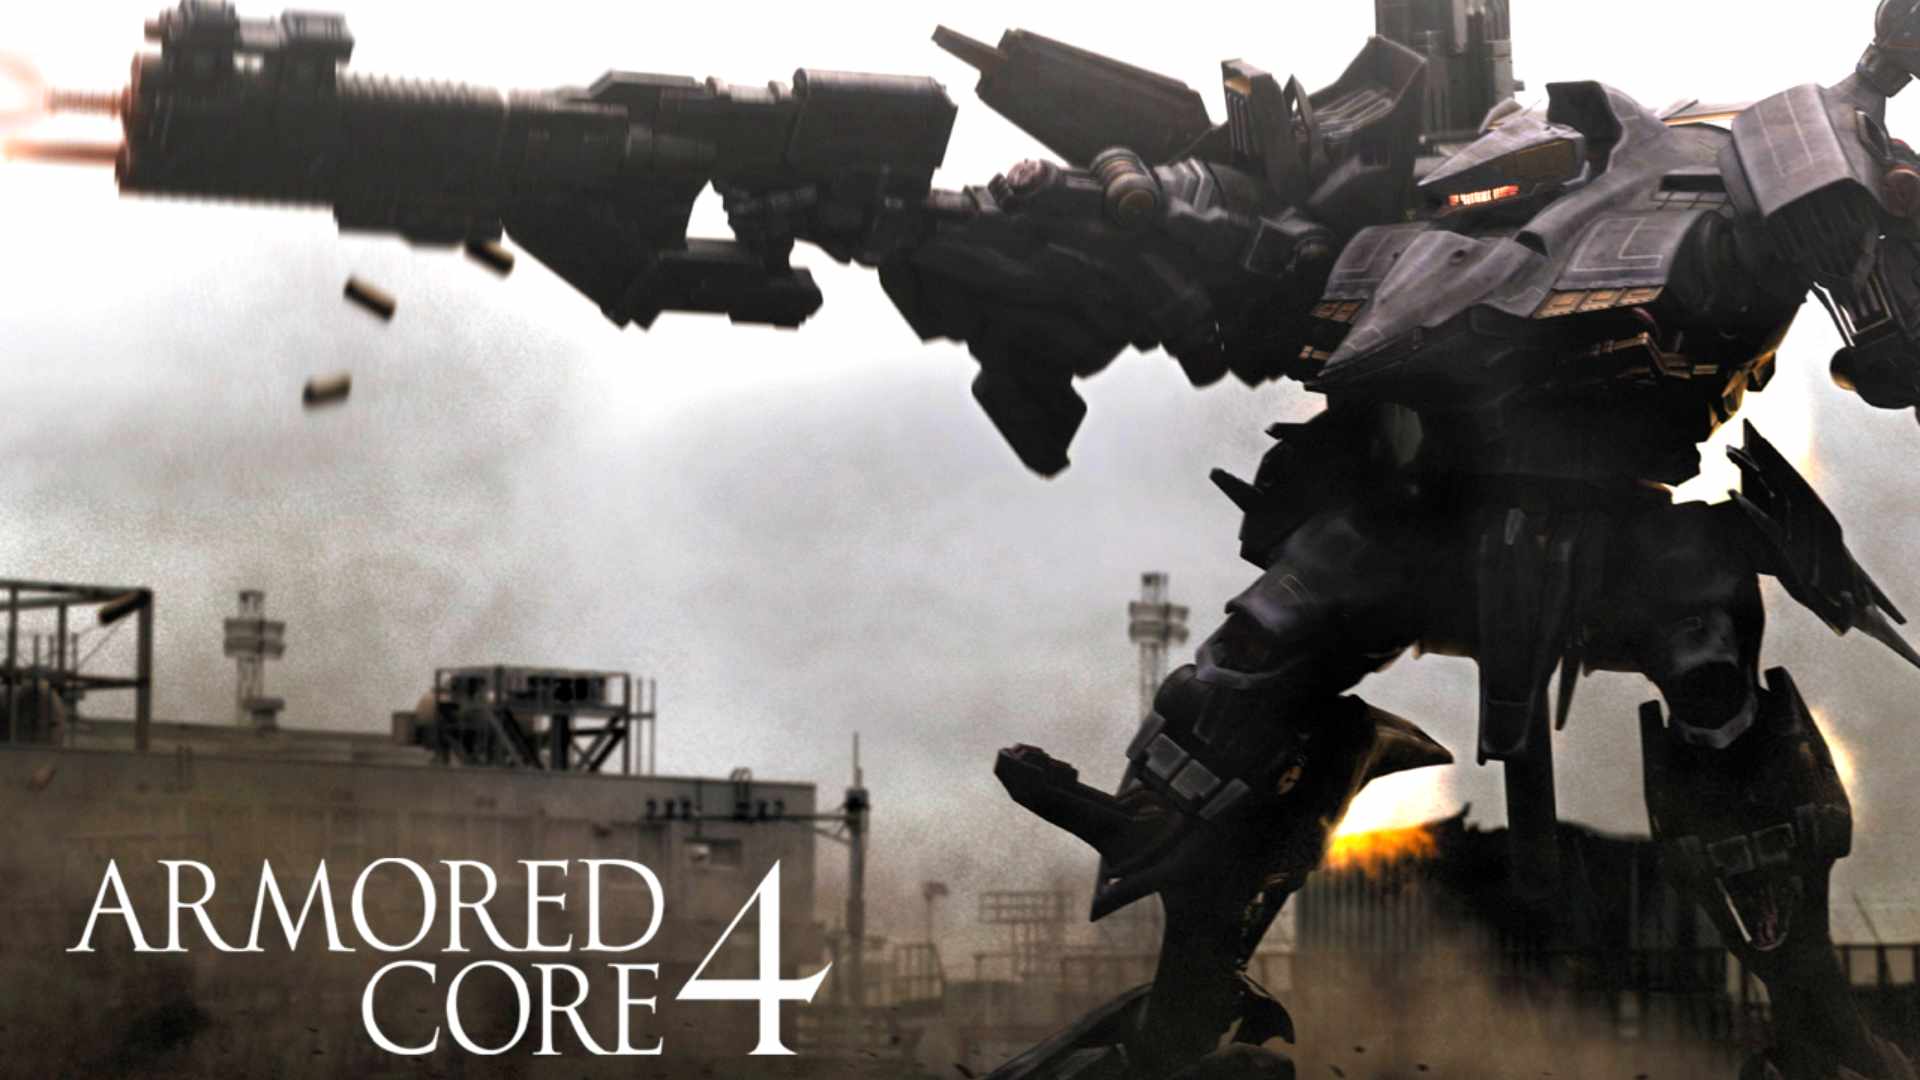 Armored Core 4 served as Miyazaki's directorial debut at FromSoftware.